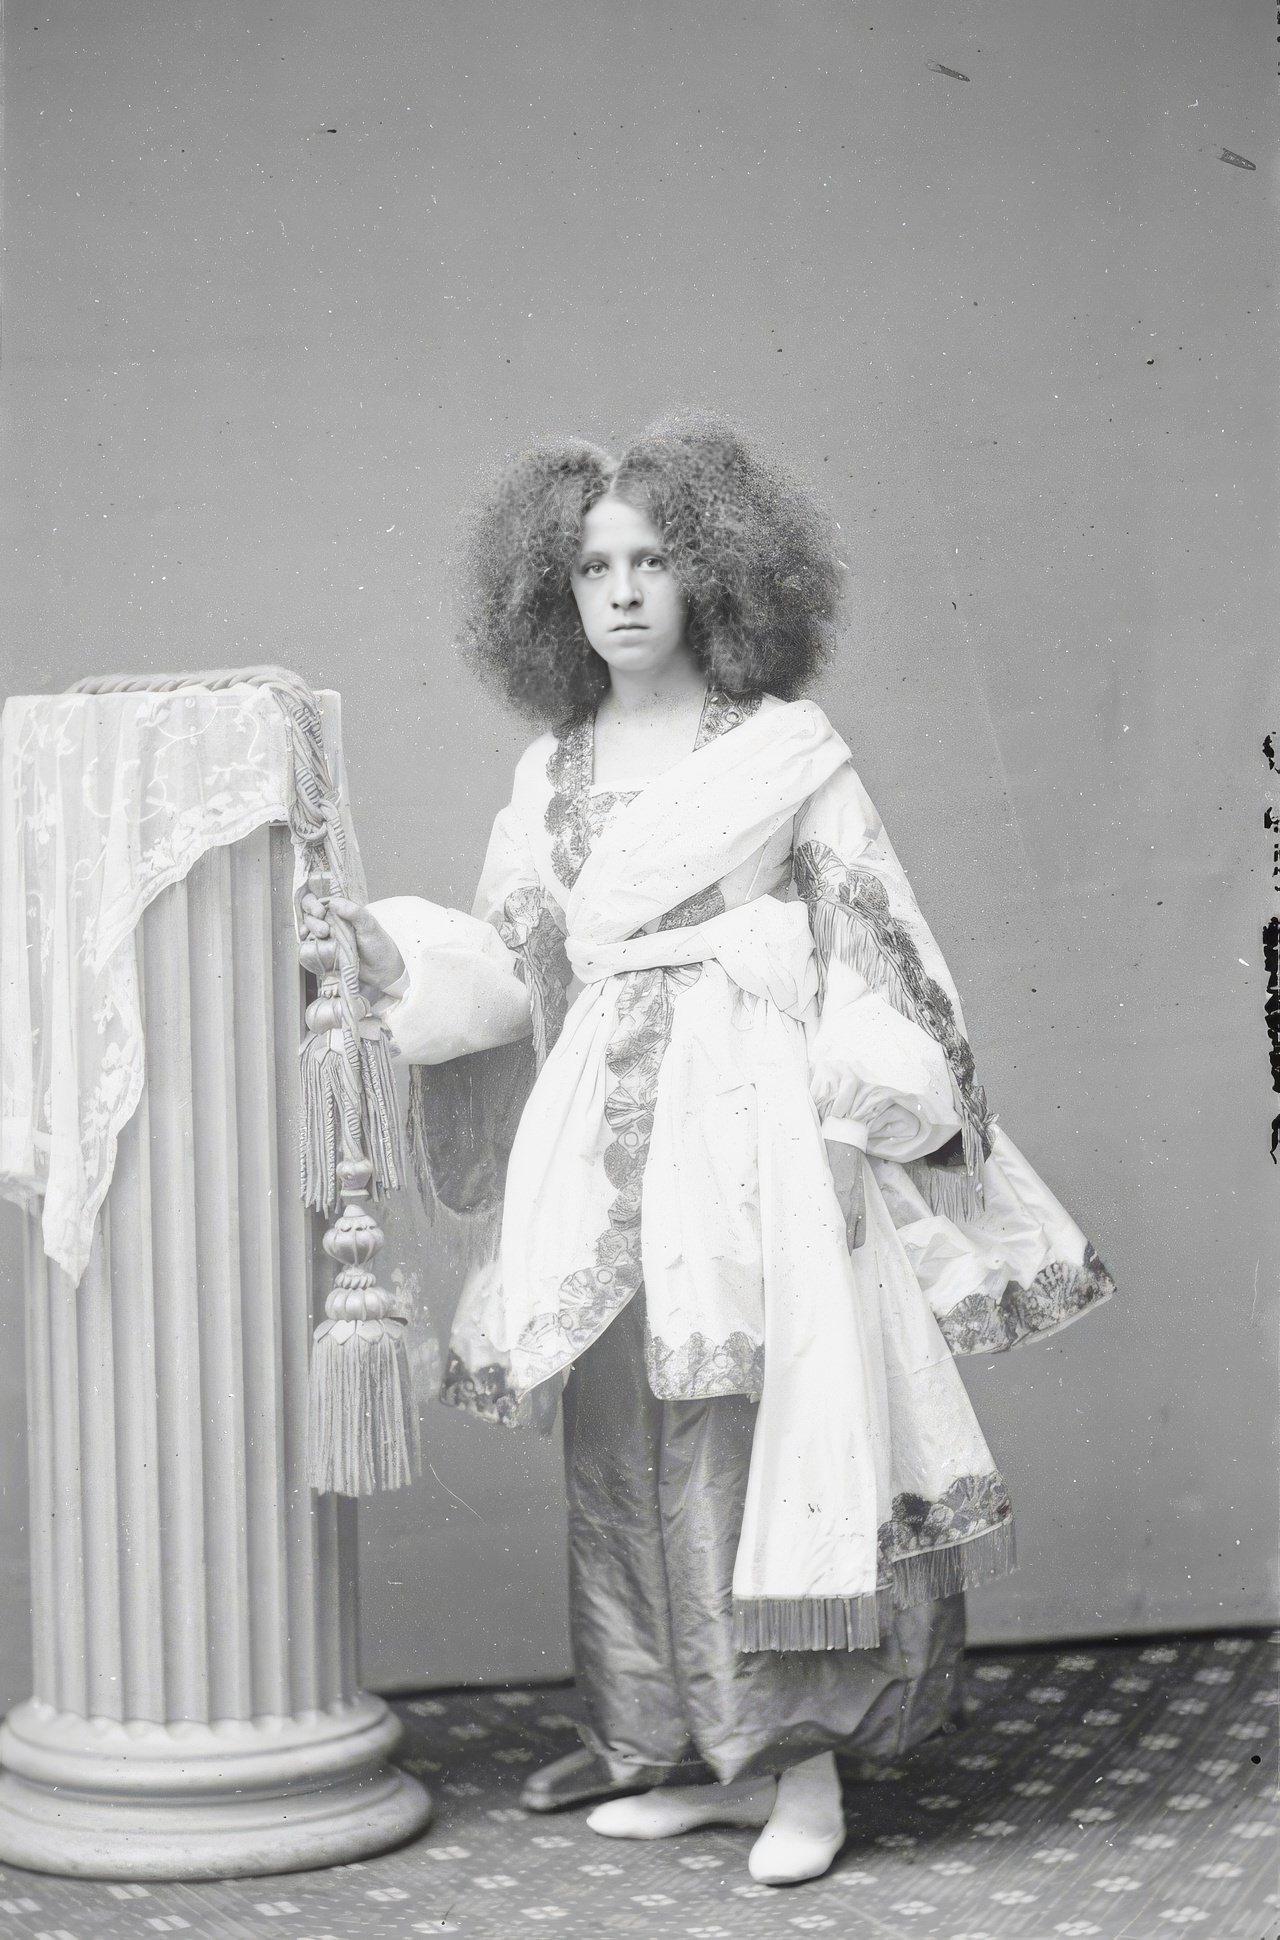 The Enigmatic Circassian Beauties Captured by Mathew Brady Studio in the 19th Century